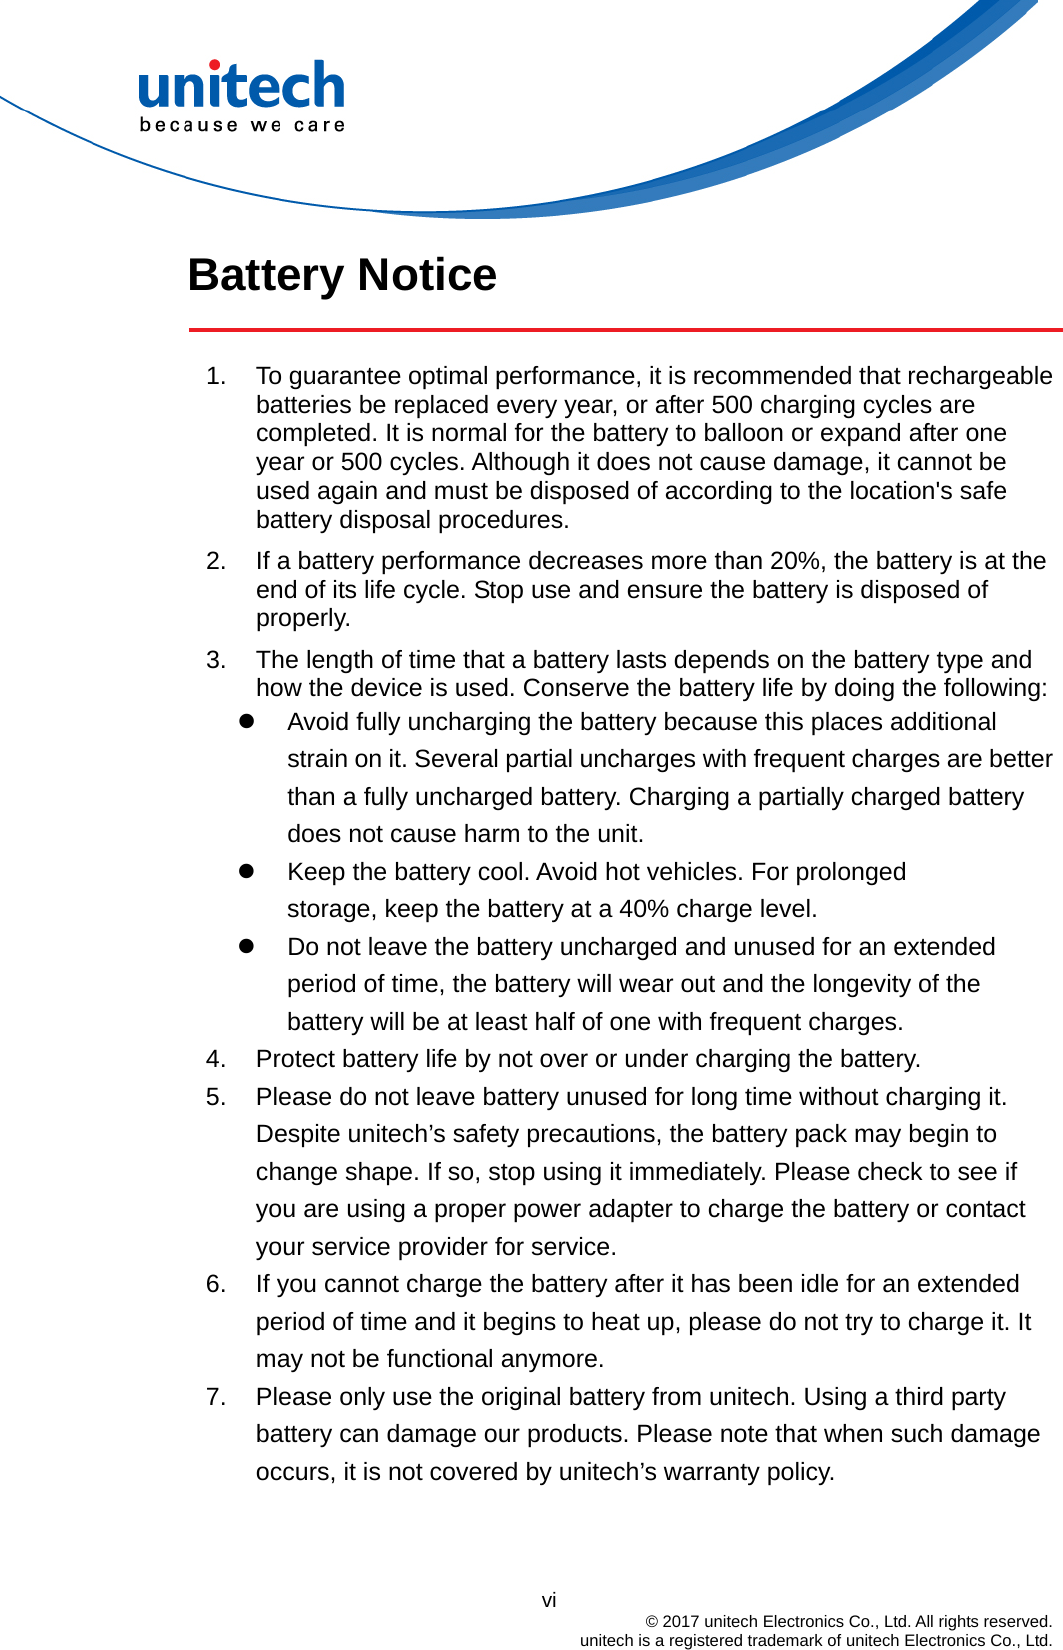  Battery Notice  1.  To guarantee optimal performance, it is recommended that rechargeable batteries be replaced every year, or after 500 charging cycles are completed. It is normal for the battery to balloon or expand after one year or 500 cycles. Although it does not cause damage, it cannot be used again and must be disposed of according to the location&apos;s safe battery disposal procedures. 2.  If a battery performance decreases more than 20%, the battery is at the end of its life cycle. Stop use and ensure the battery is disposed of properly. 3.  The length of time that a battery lasts depends on the battery type and how the device is used. Conserve the battery life by doing the following:   Avoid fully uncharging the battery because this places additional strain on it. Several partial uncharges with frequent charges are better than a fully uncharged battery. Charging a partially charged battery does not cause harm to the unit.   Keep the battery cool. Avoid hot vehicles. For prolonged              storage, keep the battery at a 40% charge level.   Do not leave the battery uncharged and unused for an extended period of time, the battery will wear out and the longevity of the battery will be at least half of one with frequent charges. 4.  Protect battery life by not over or under charging the battery. 5.  Please do not leave battery unused for long time without charging it. Despite unitech’s safety precautions, the battery pack may begin to change shape. If so, stop using it immediately. Please check to see if you are using a proper power adapter to charge the battery or contact your service provider for service. 6.  If you cannot charge the battery after it has been idle for an extended period of time and it begins to heat up, please do not try to charge it. It may not be functional anymore. 7.  Please only use the original battery from unitech. Using a third party battery can damage our products. Please note that when such damage occurs, it is not covered by unitech’s warranty policy.                                           vi  © 2017 unitech Electronics Co., Ltd. All rights reserved.   unitech is a registered trademark of unitech Electronics Co., Ltd. 